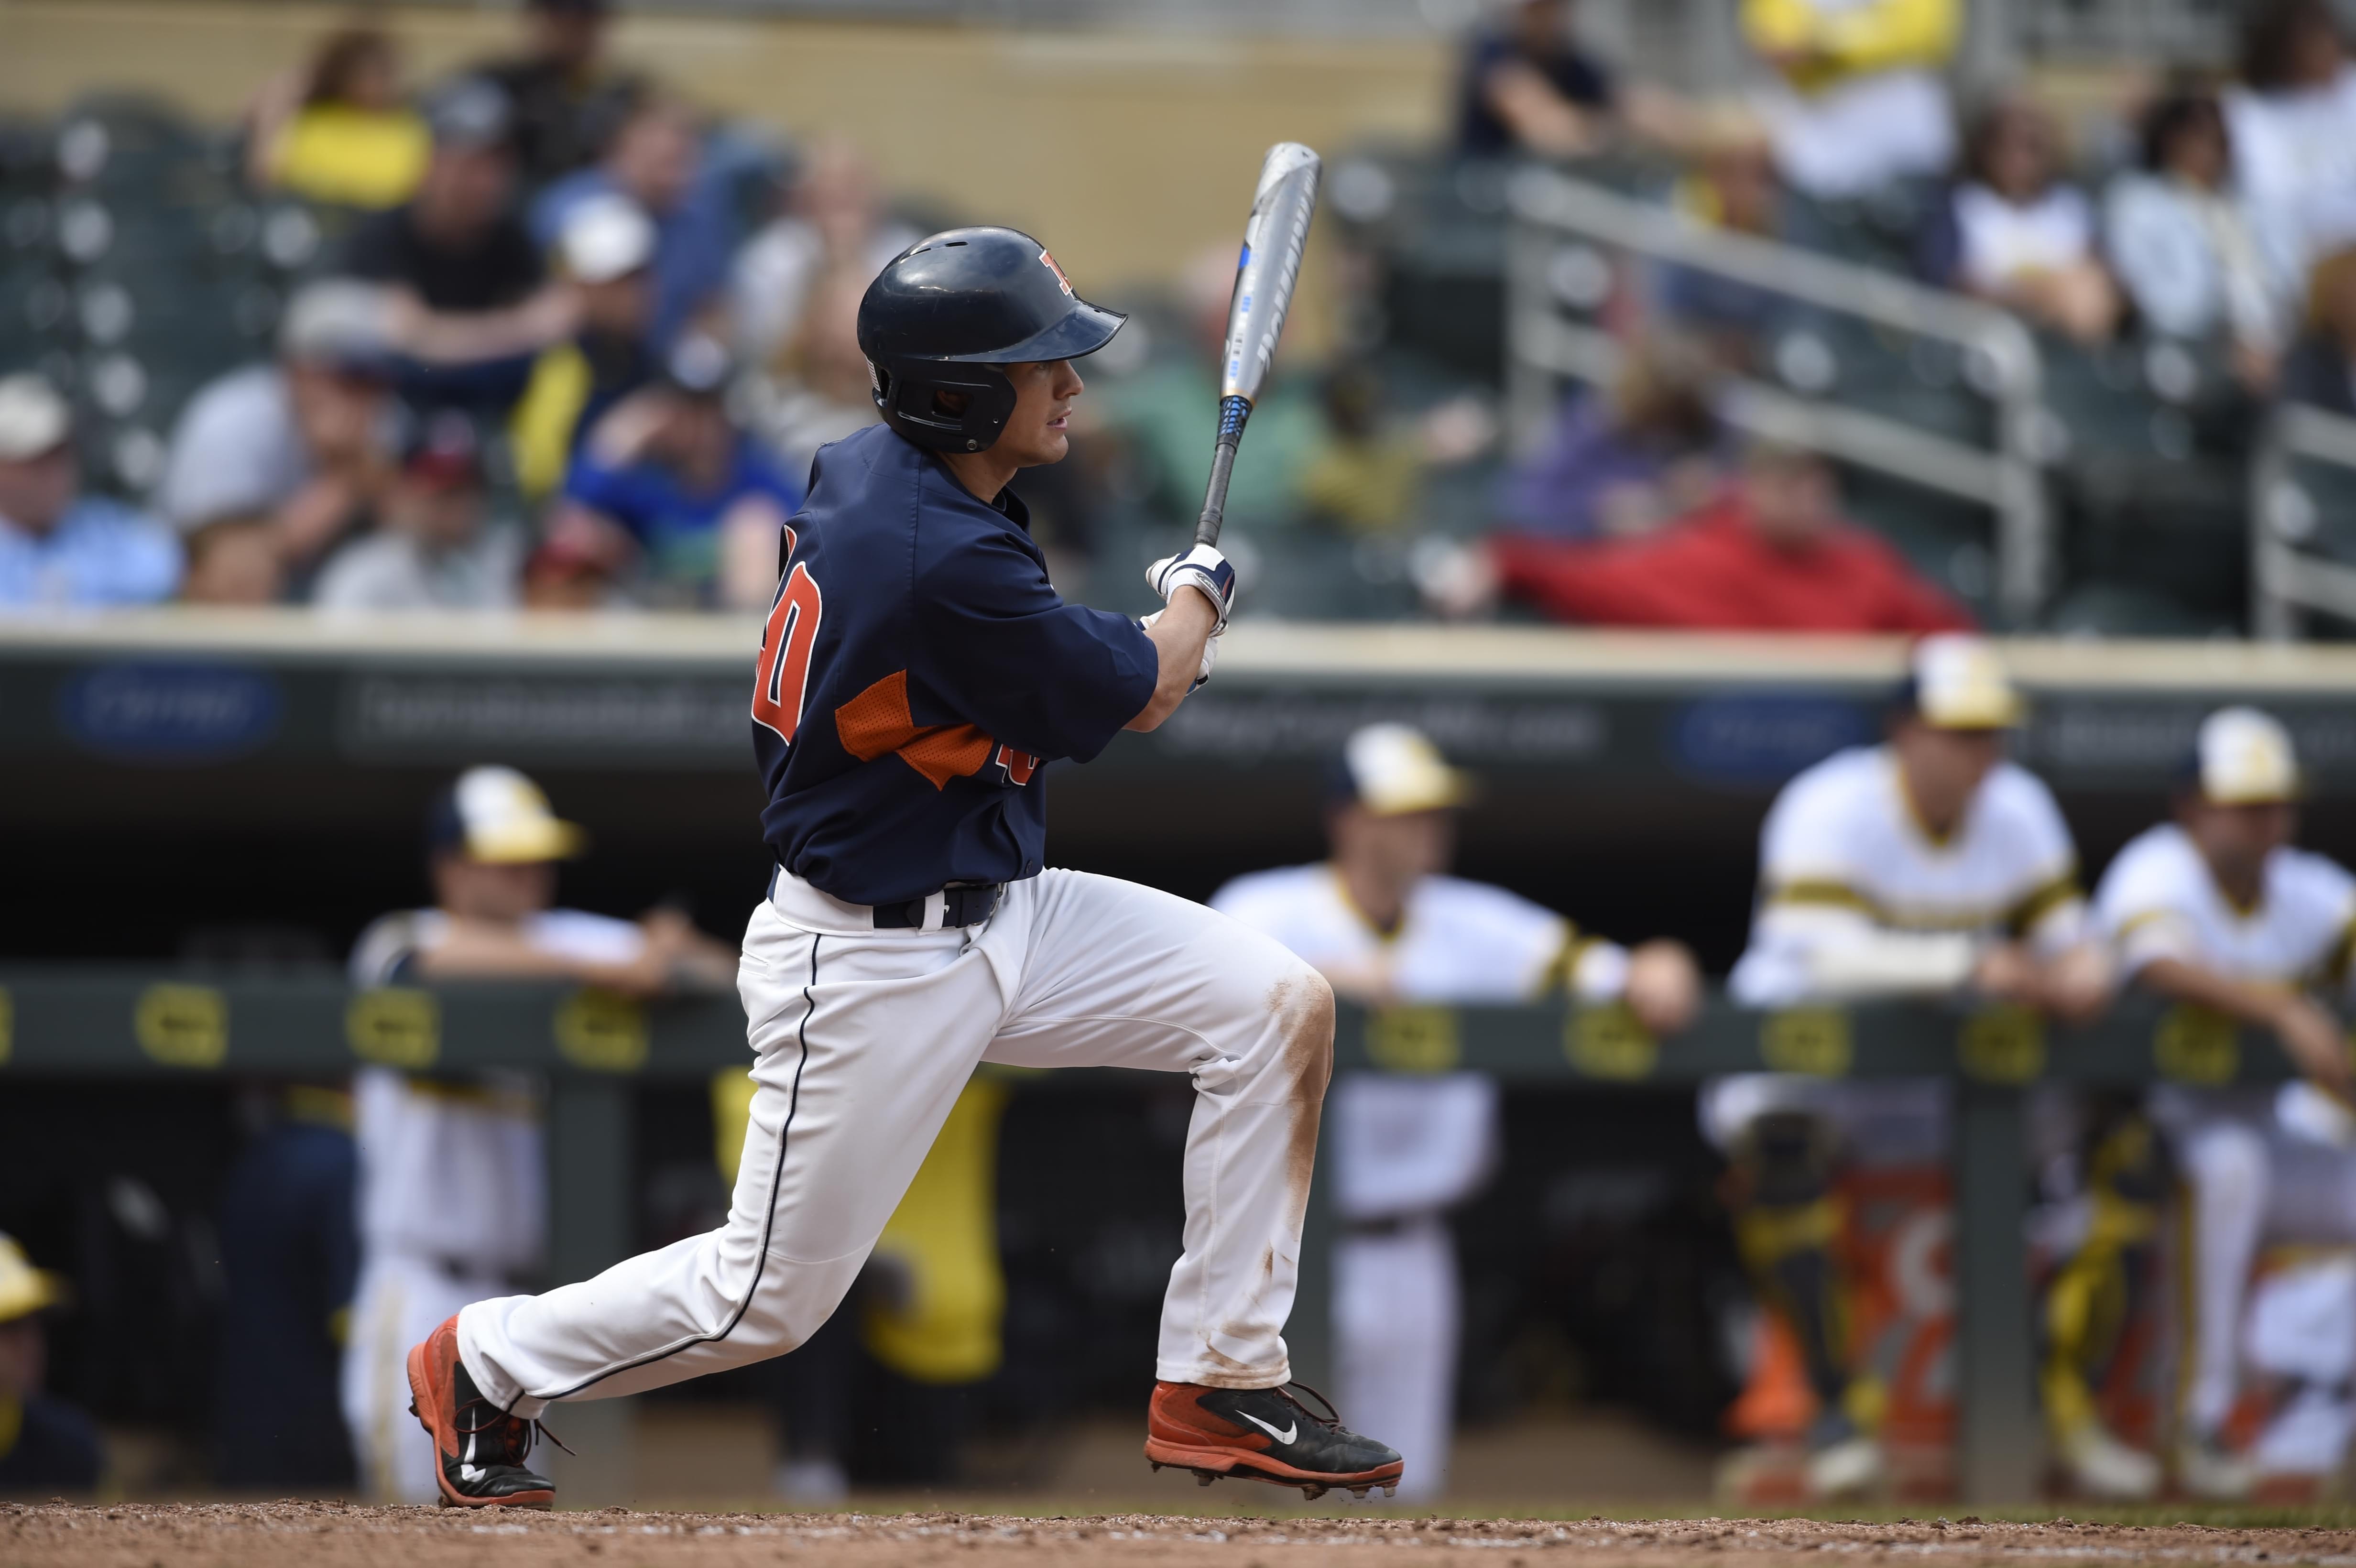 Illinois outfielder Will Krug bats against Michigan during the eighth inning of Saturday's fourth-round NCAA Big Ten Tournament 5-3 loss to Michigan.